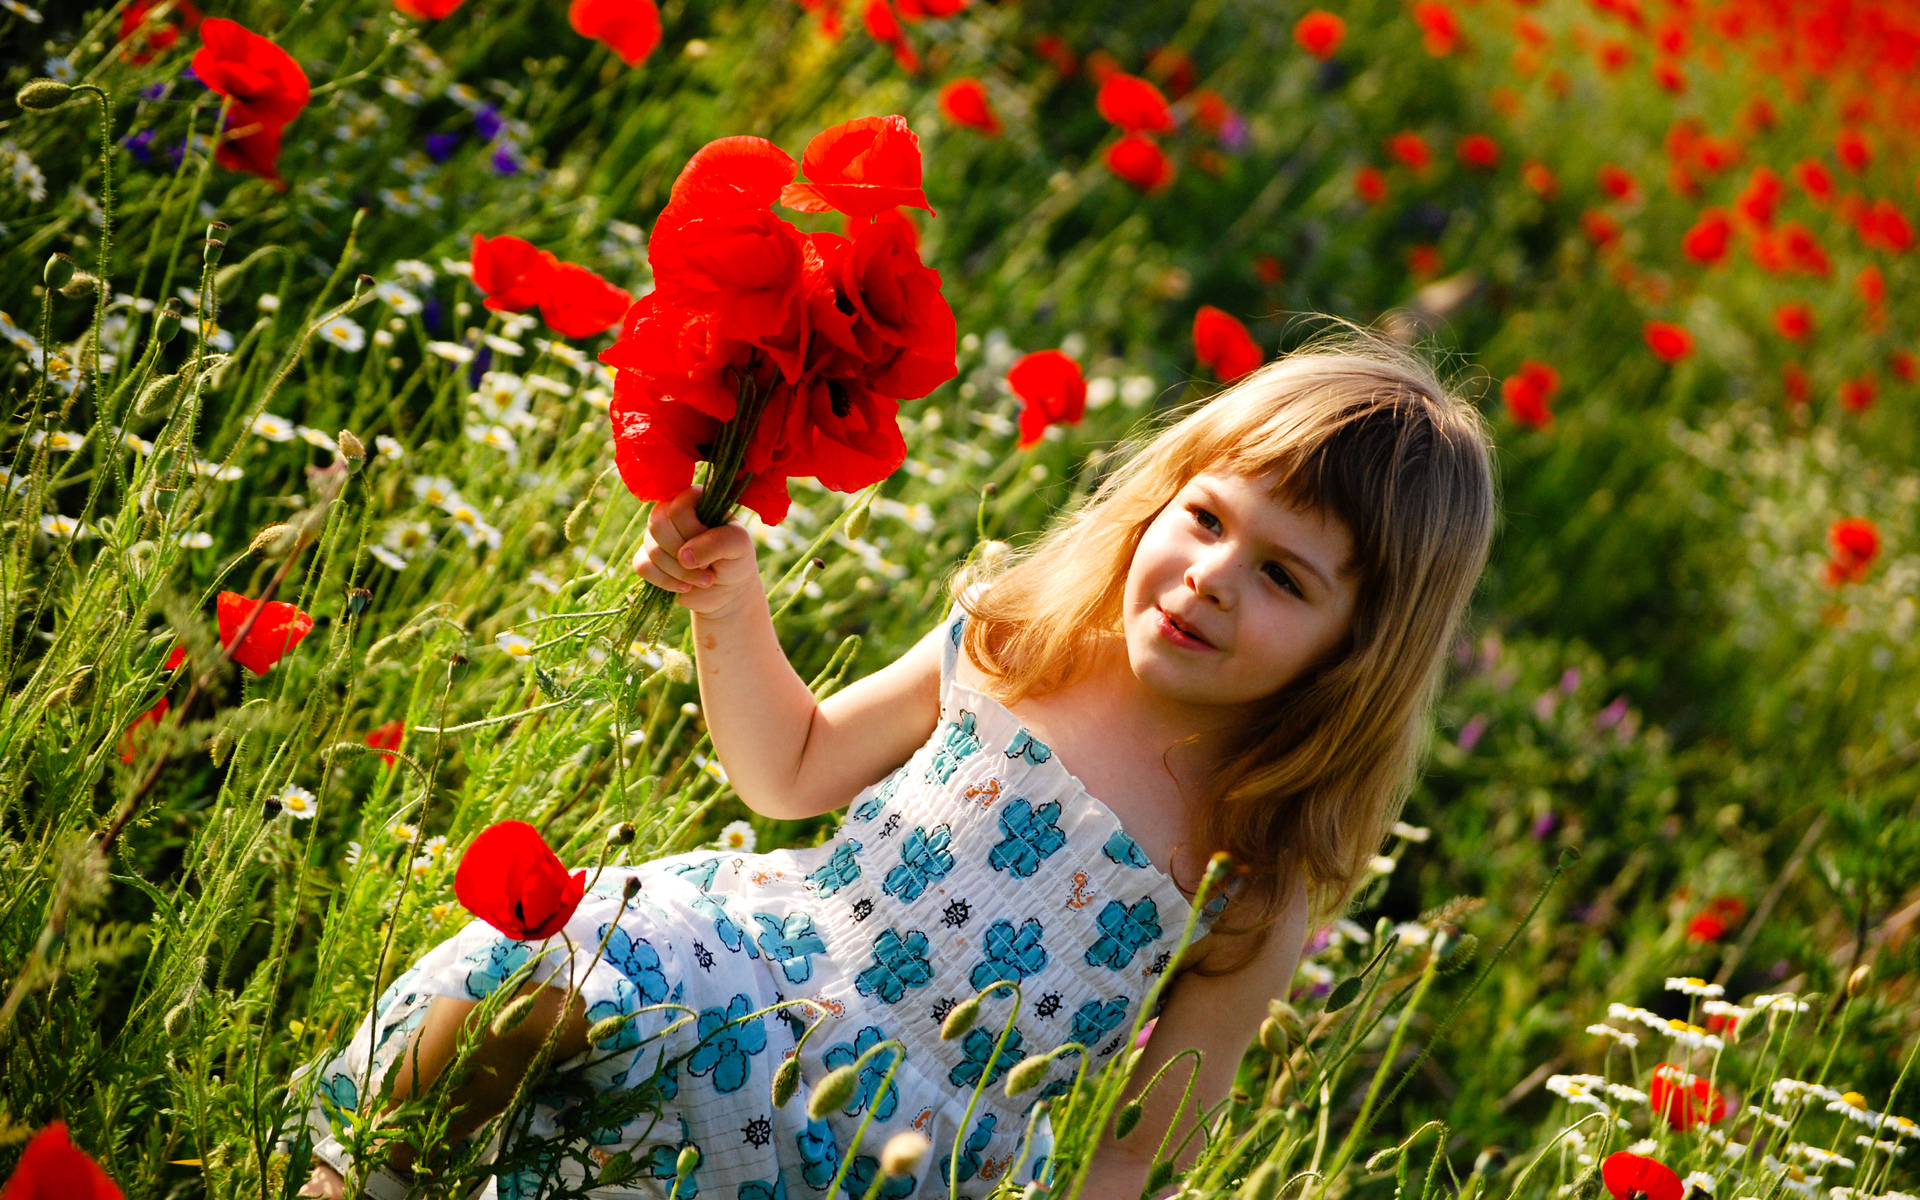 people, Children, Kids, Cute, Females, Girls, Blondes, Nature, Garden, Fields, Plants, Flowers, Red, Poppies, Red, Color Wallpaper